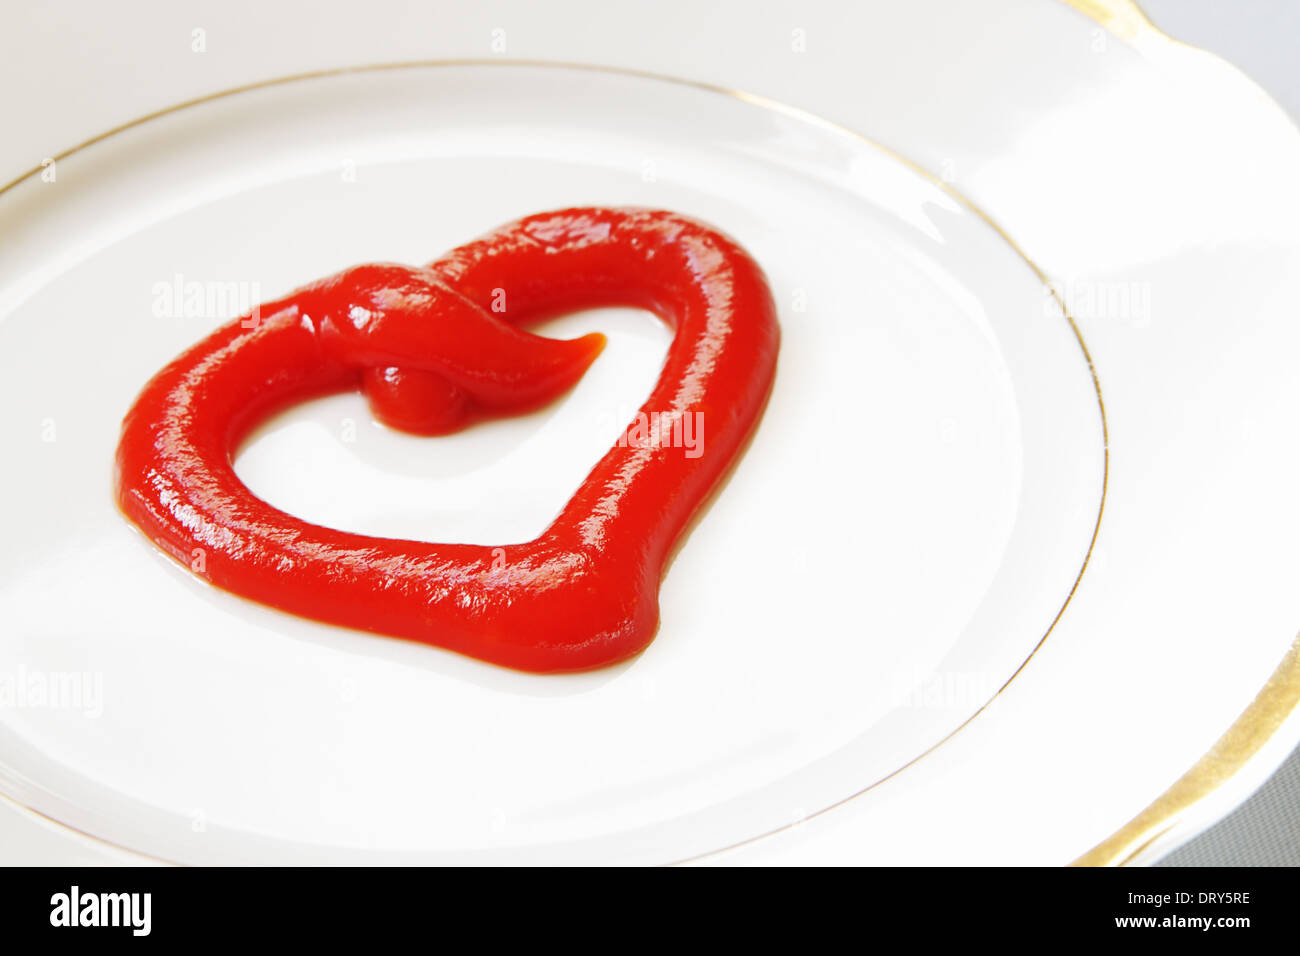 Declaration of love. Ketchup in the form of heart on a white plate. Stock Photo